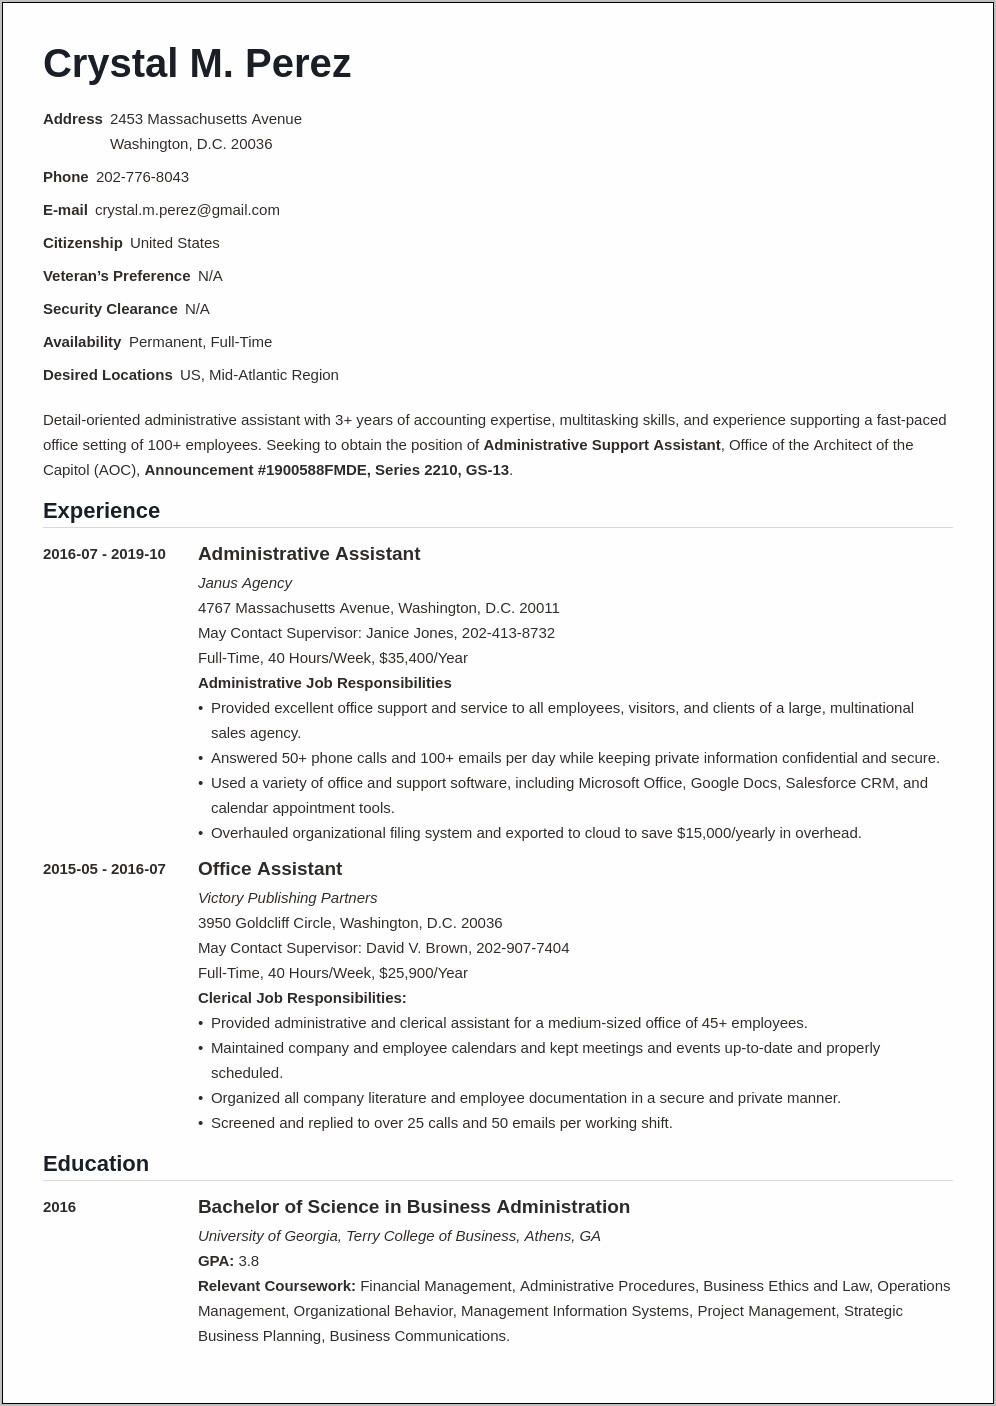 Example Of Entry Level Federal Job Resume